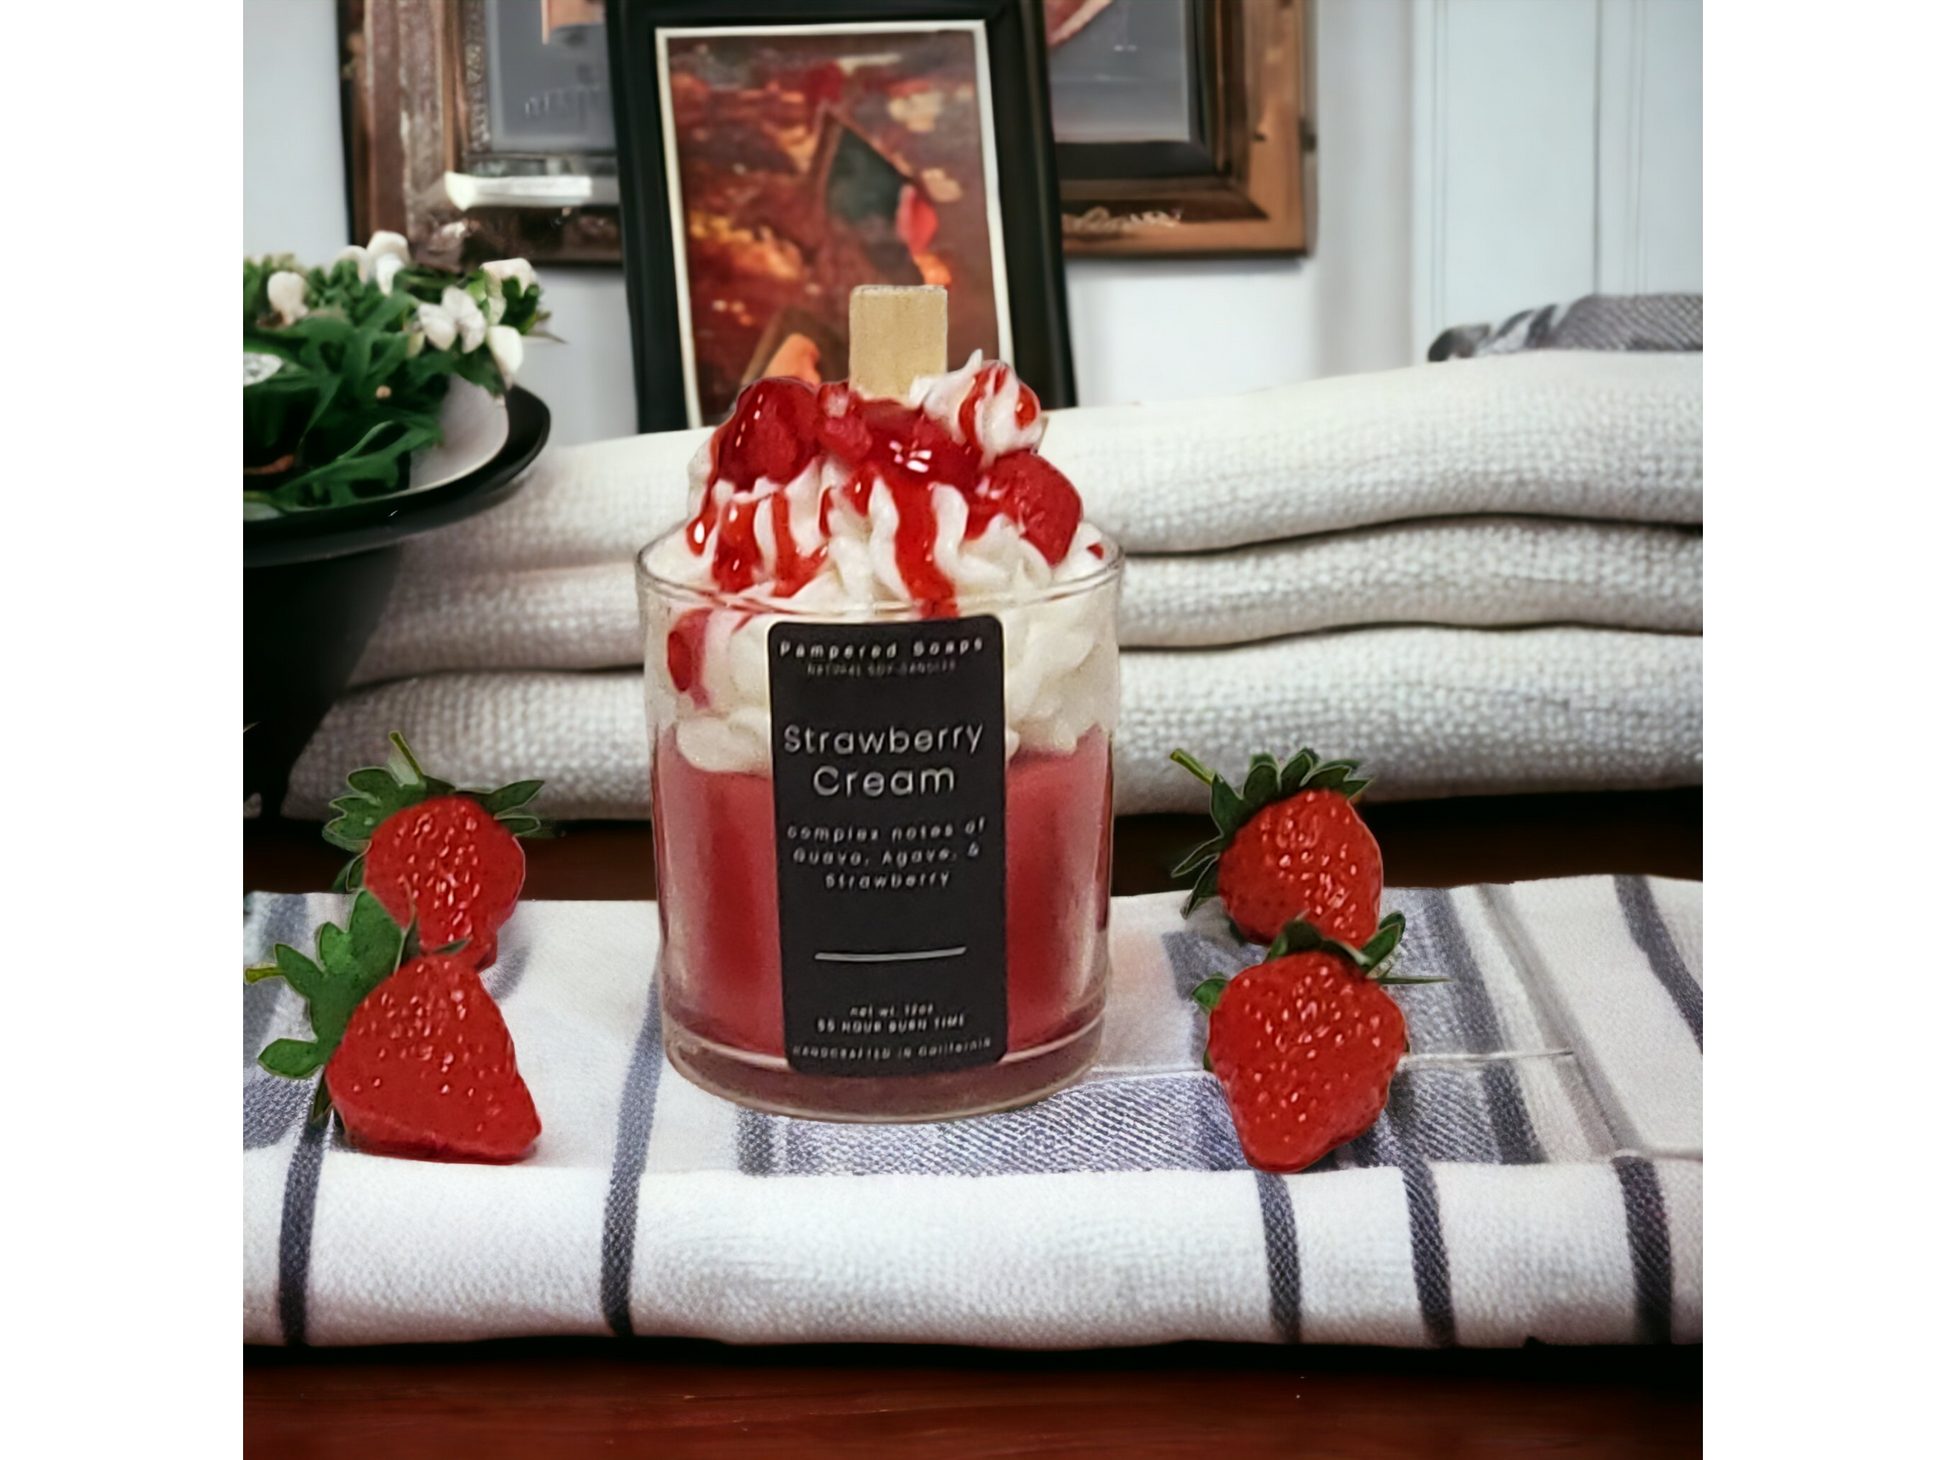 Strawberry Creme Dessert Candle Pampered Soaps